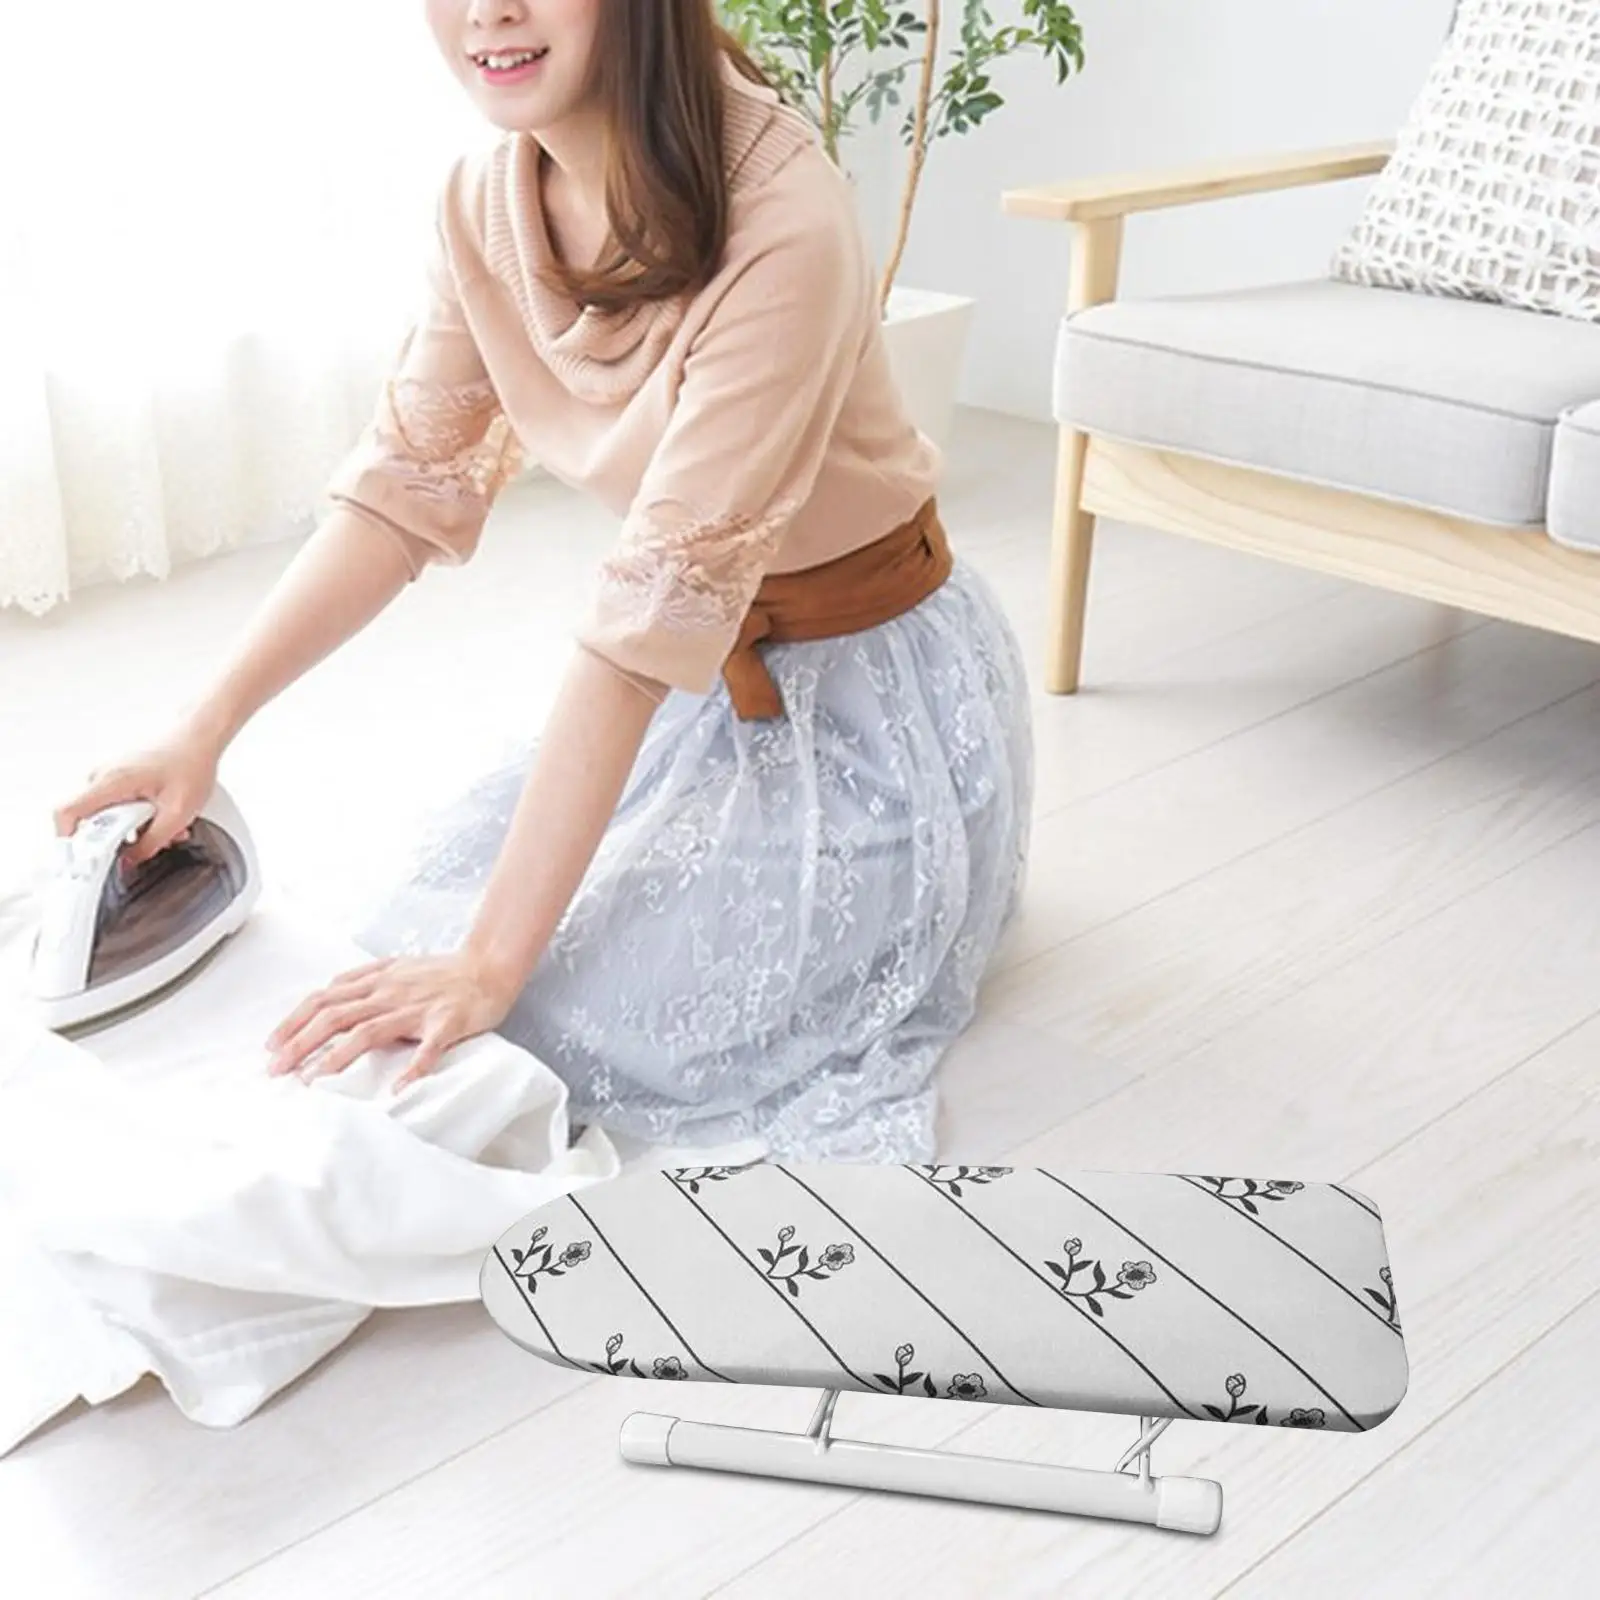 Small Ironing Board with Iron Board Cover Sleeve Rack Portable Tabletop Iron Board for Dorm Laundry Room Home Sewing Room Travel